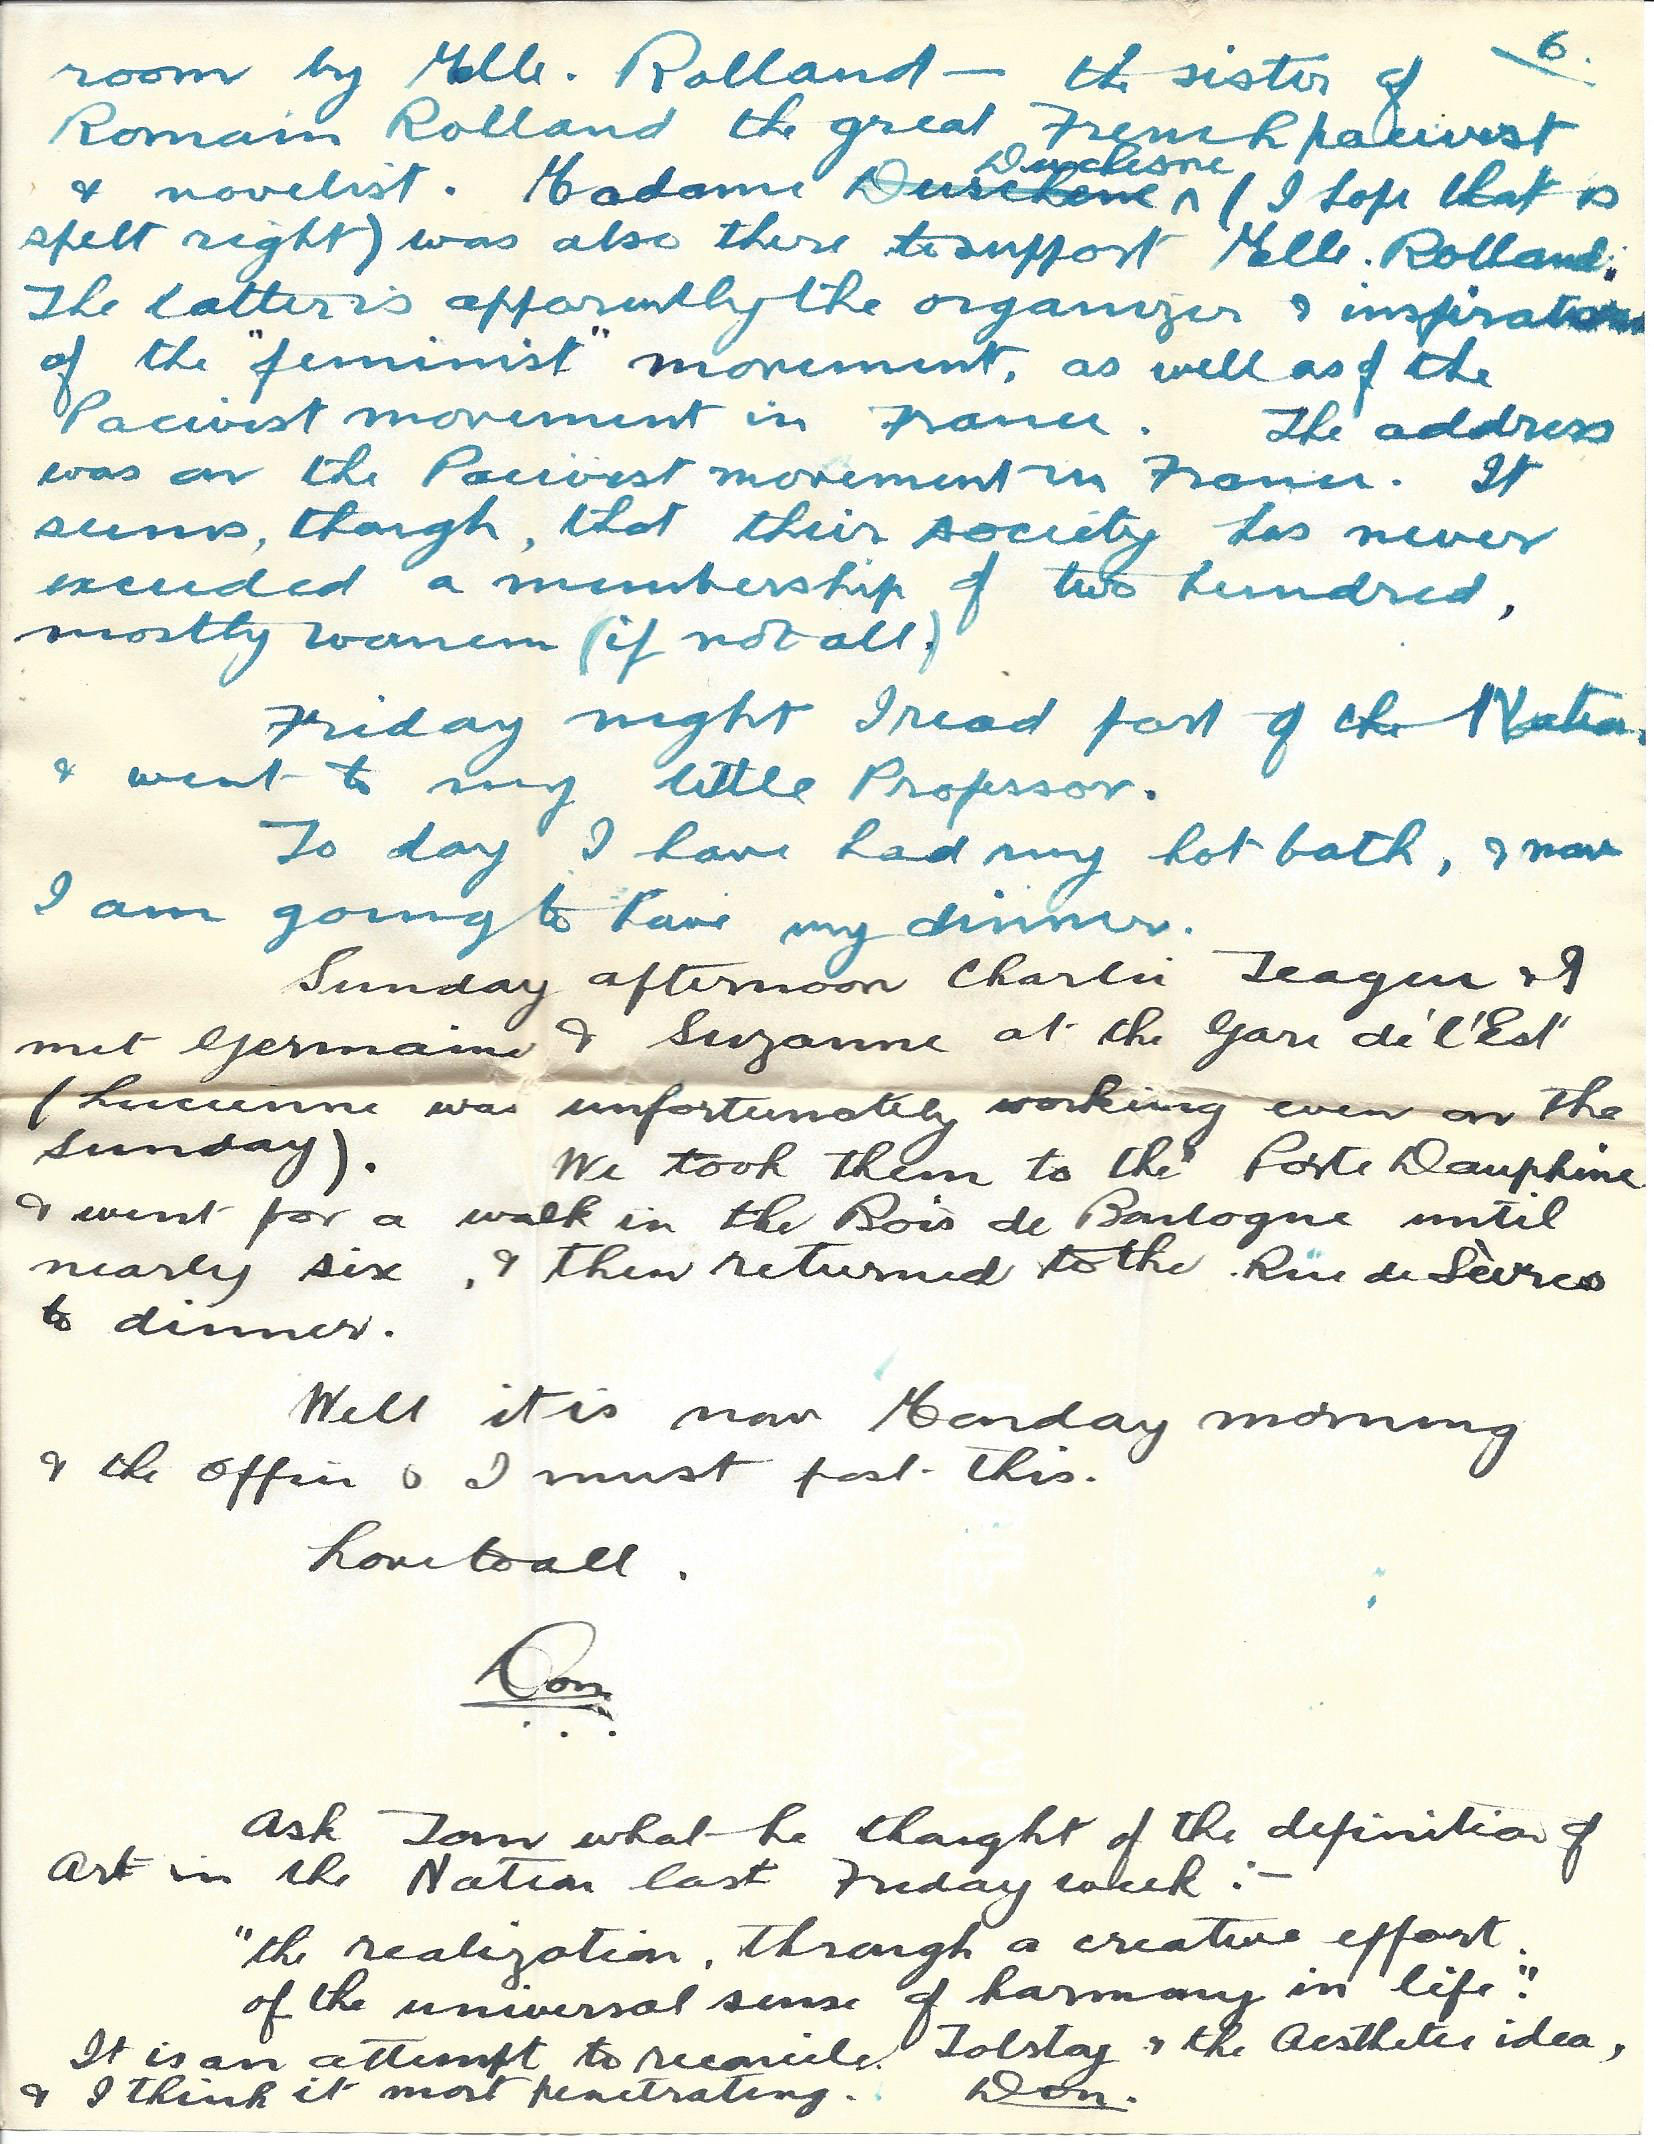 1919-12-13 Page 6 letter by Donald Bearman